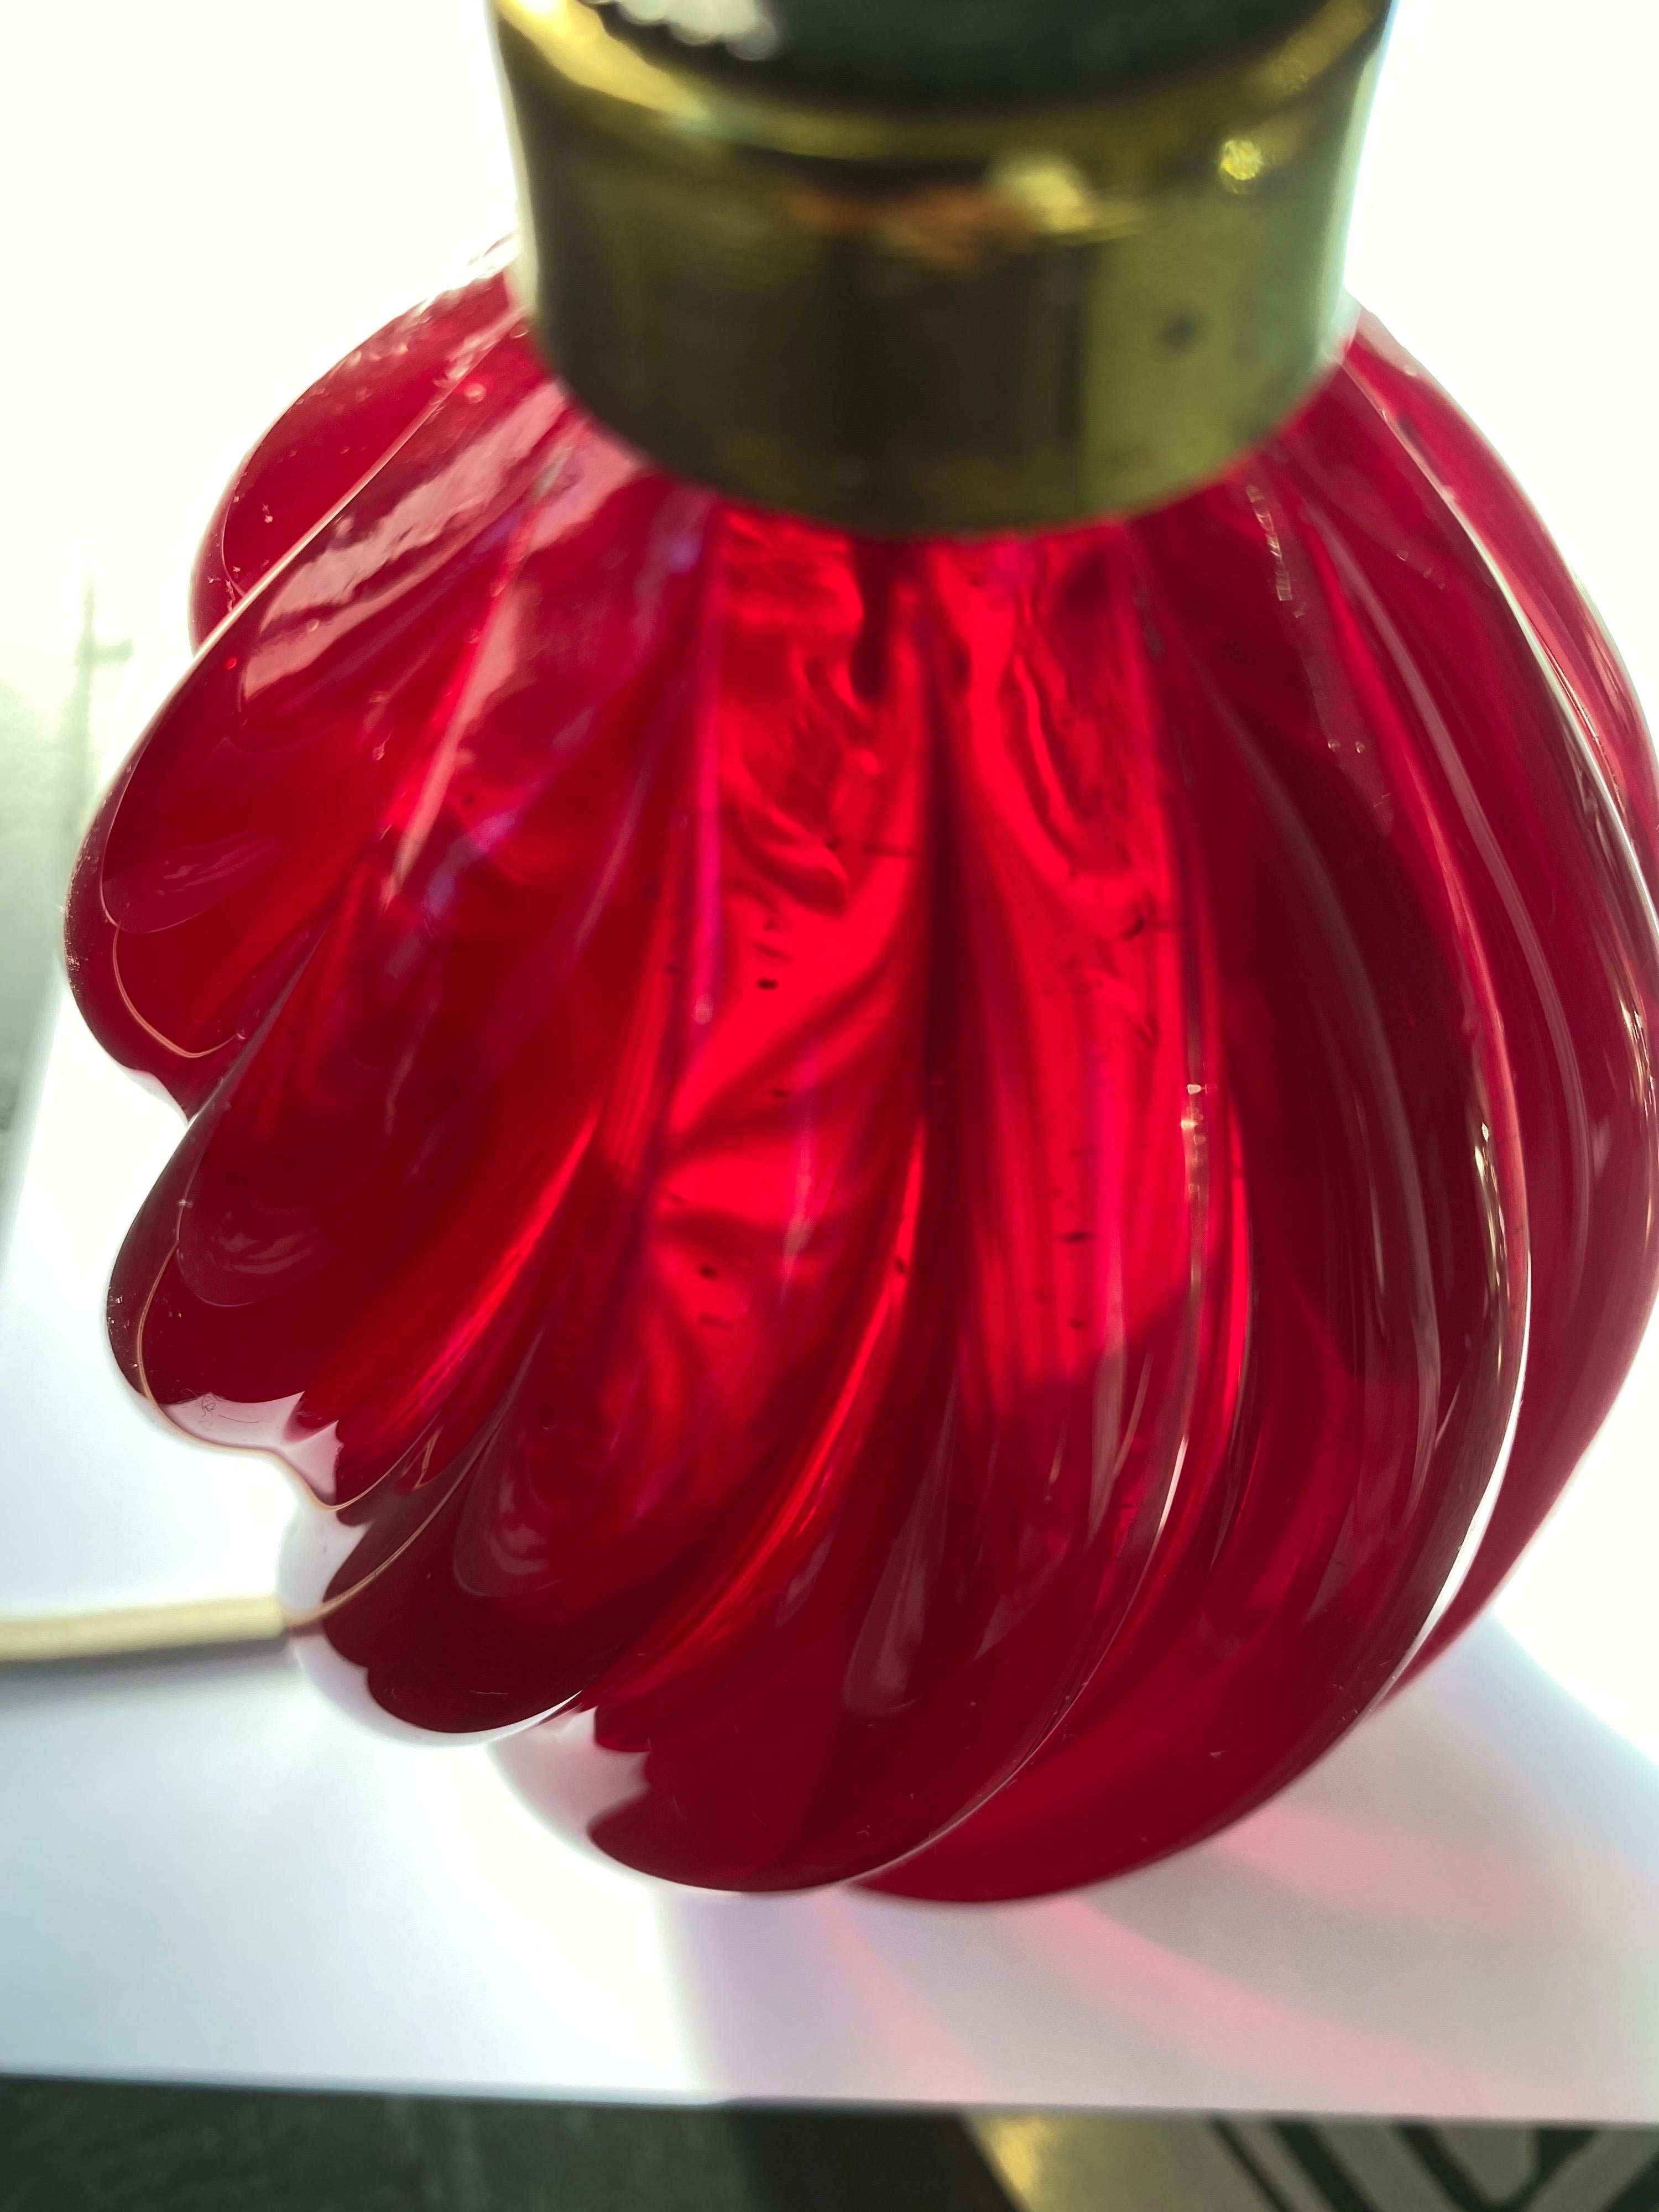 Important Venini Table Lamp in Red, Form 